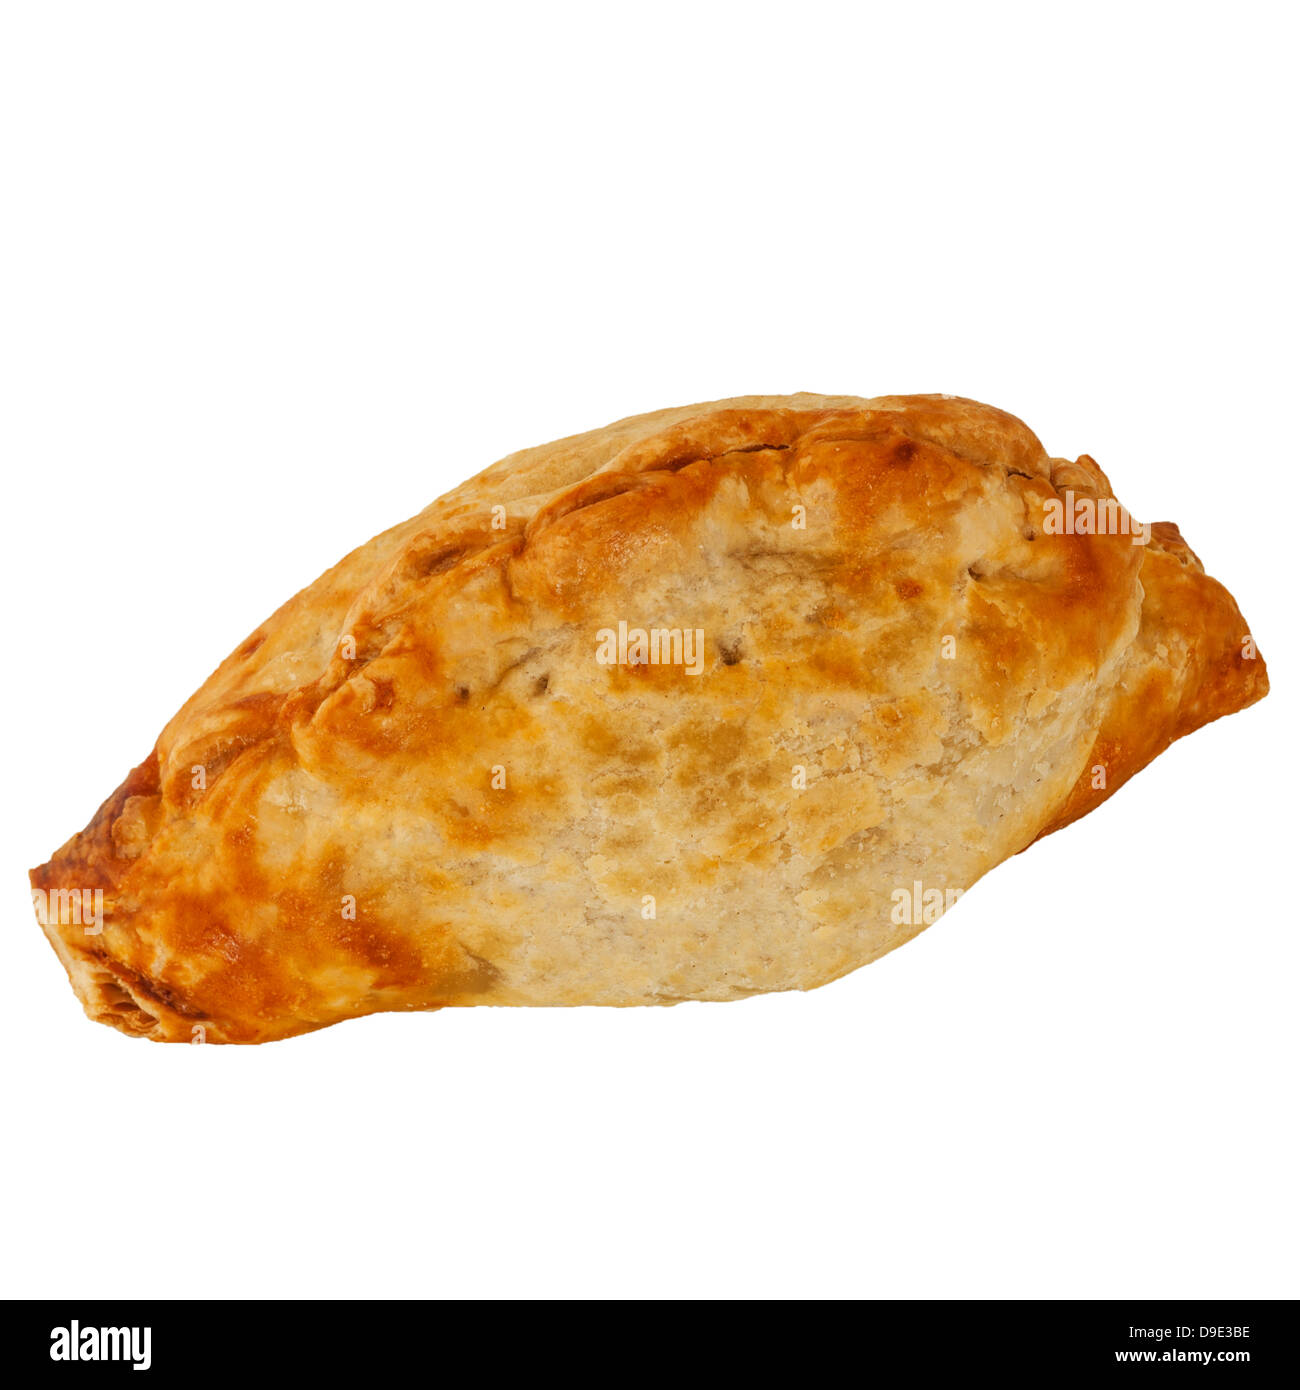 A home made Cornish Pasty on a white background Stock Photo